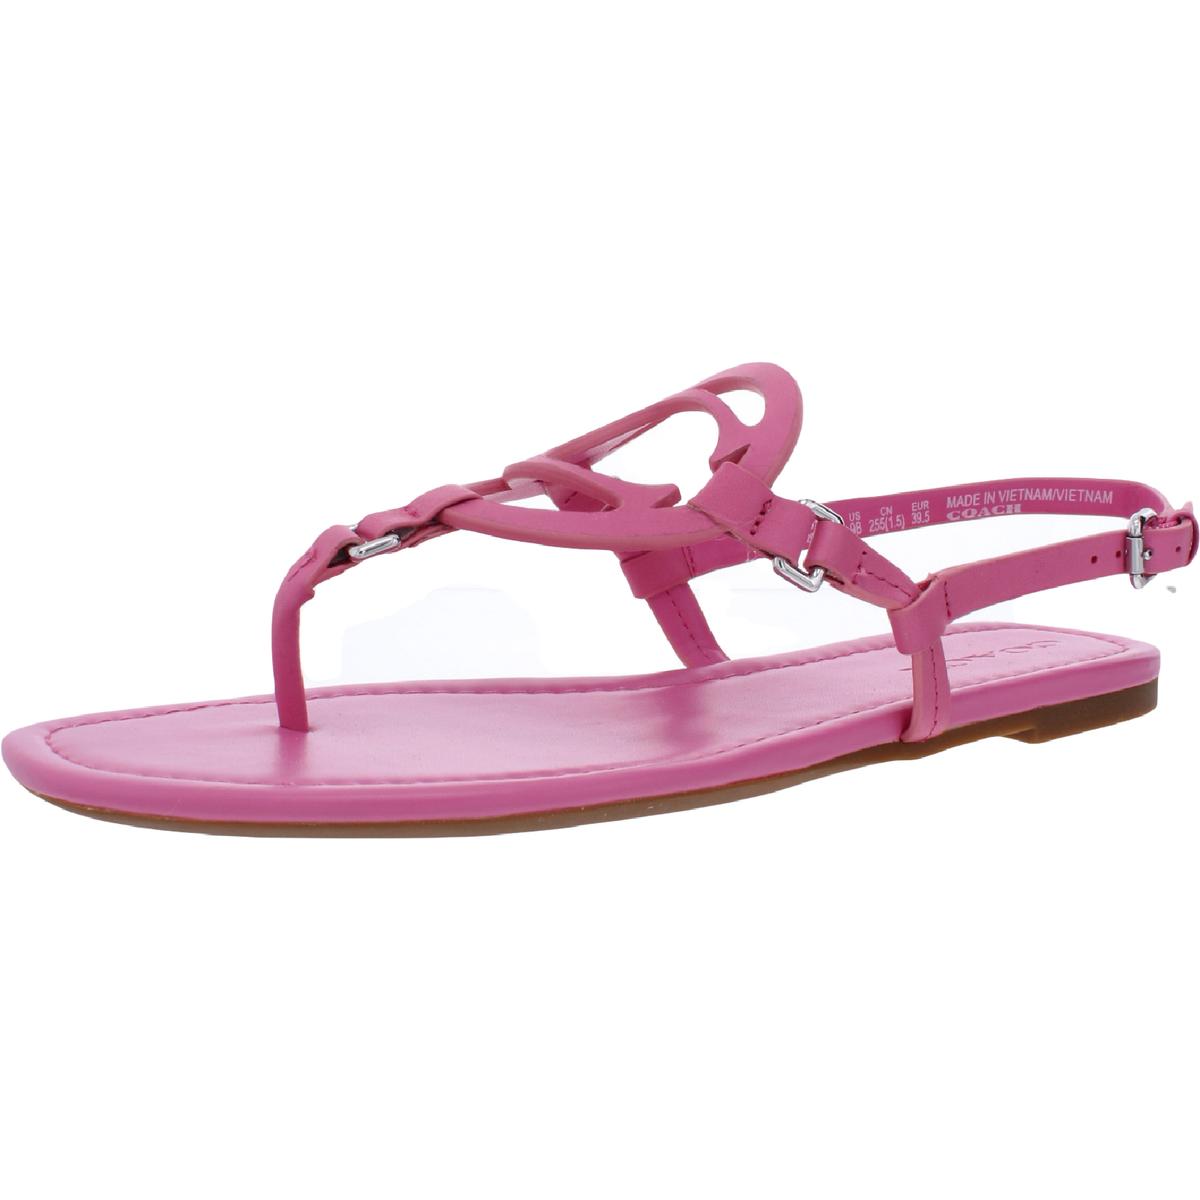 Women's Coach Jeri Petunia Pink Leather Thong Sandals Size 8 B for sale  online | eBay